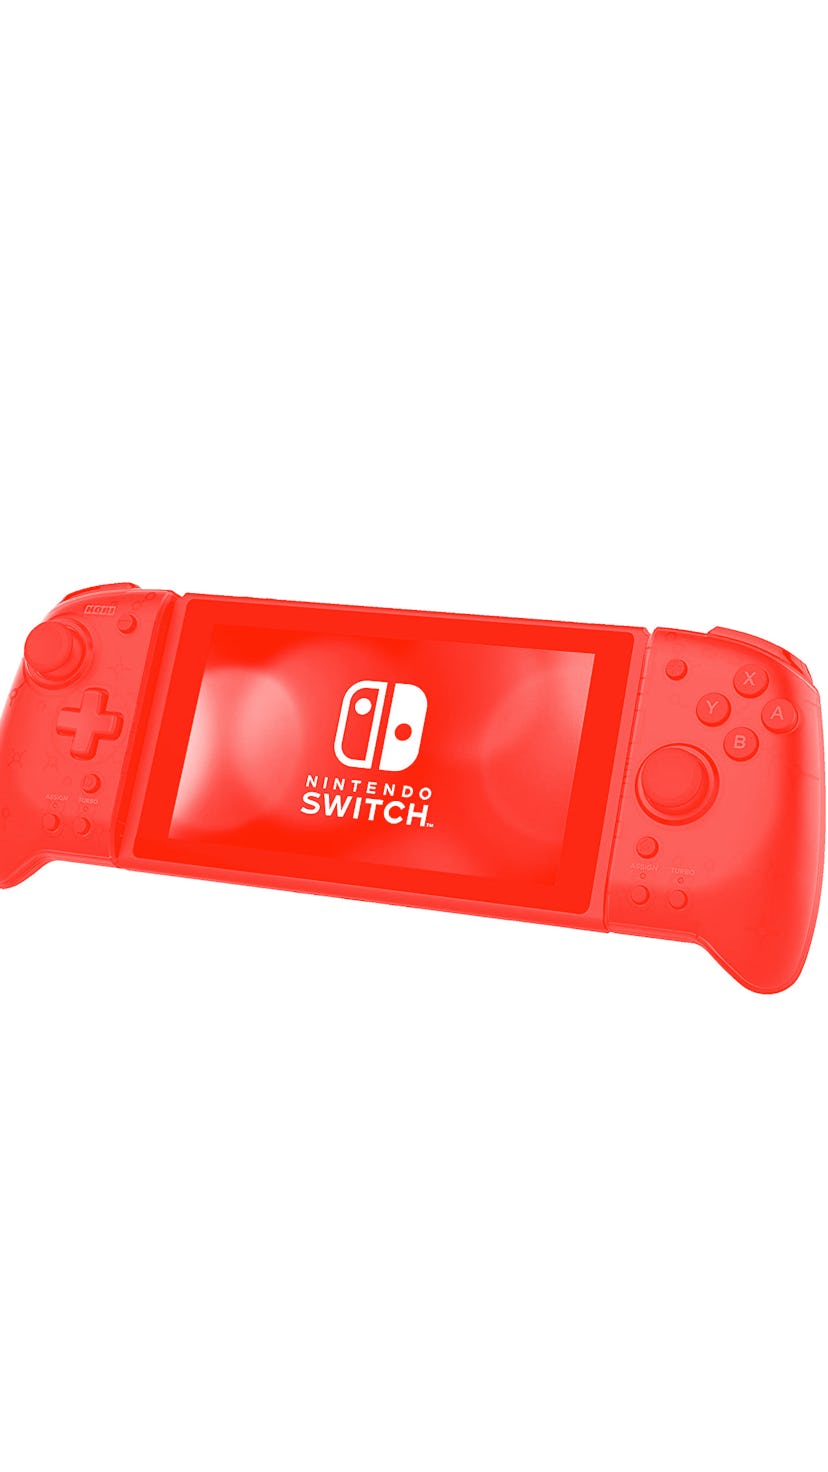 A Nintendo Switch with controller accessories. Video games. Gaming.